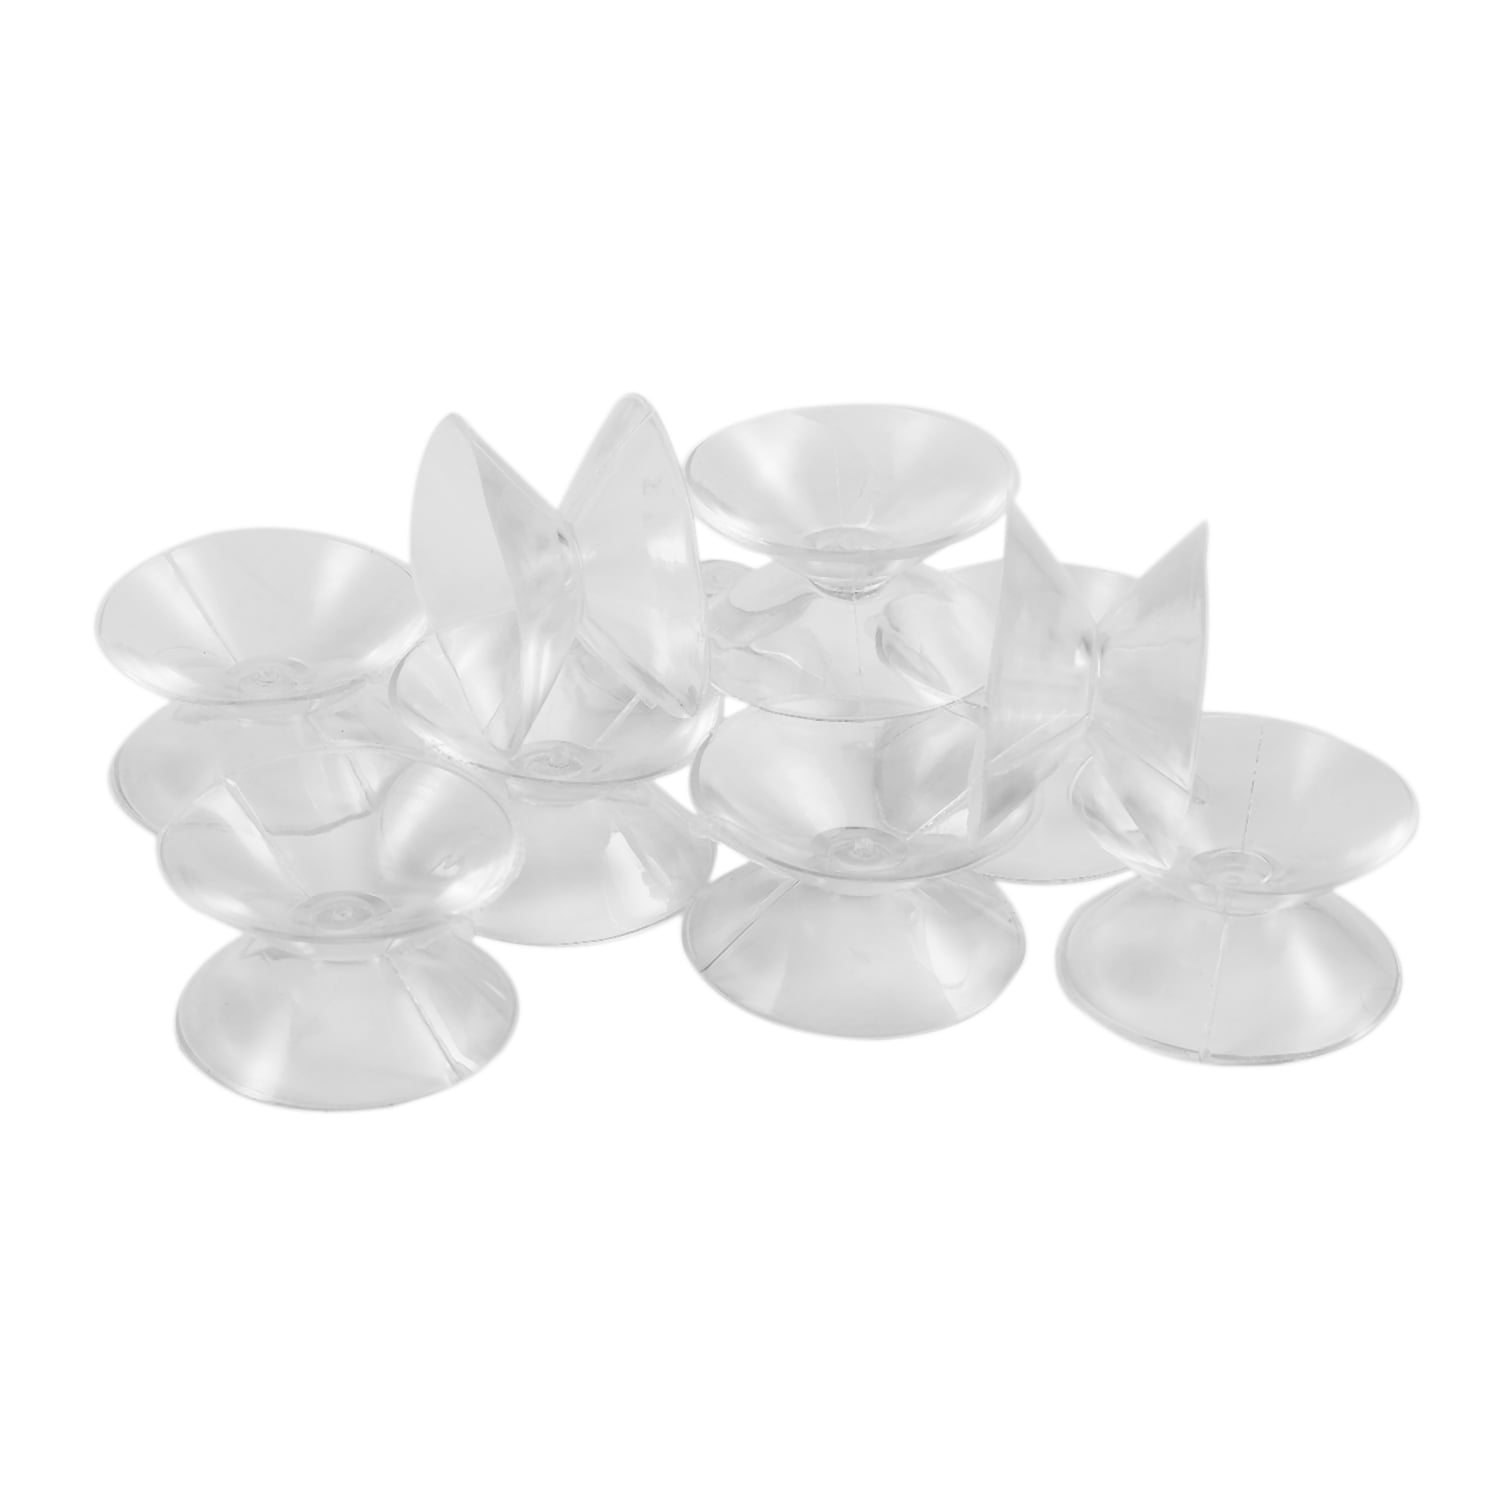 10 x Air suction cup Double sided silicone for Aquarium fish K6V2 